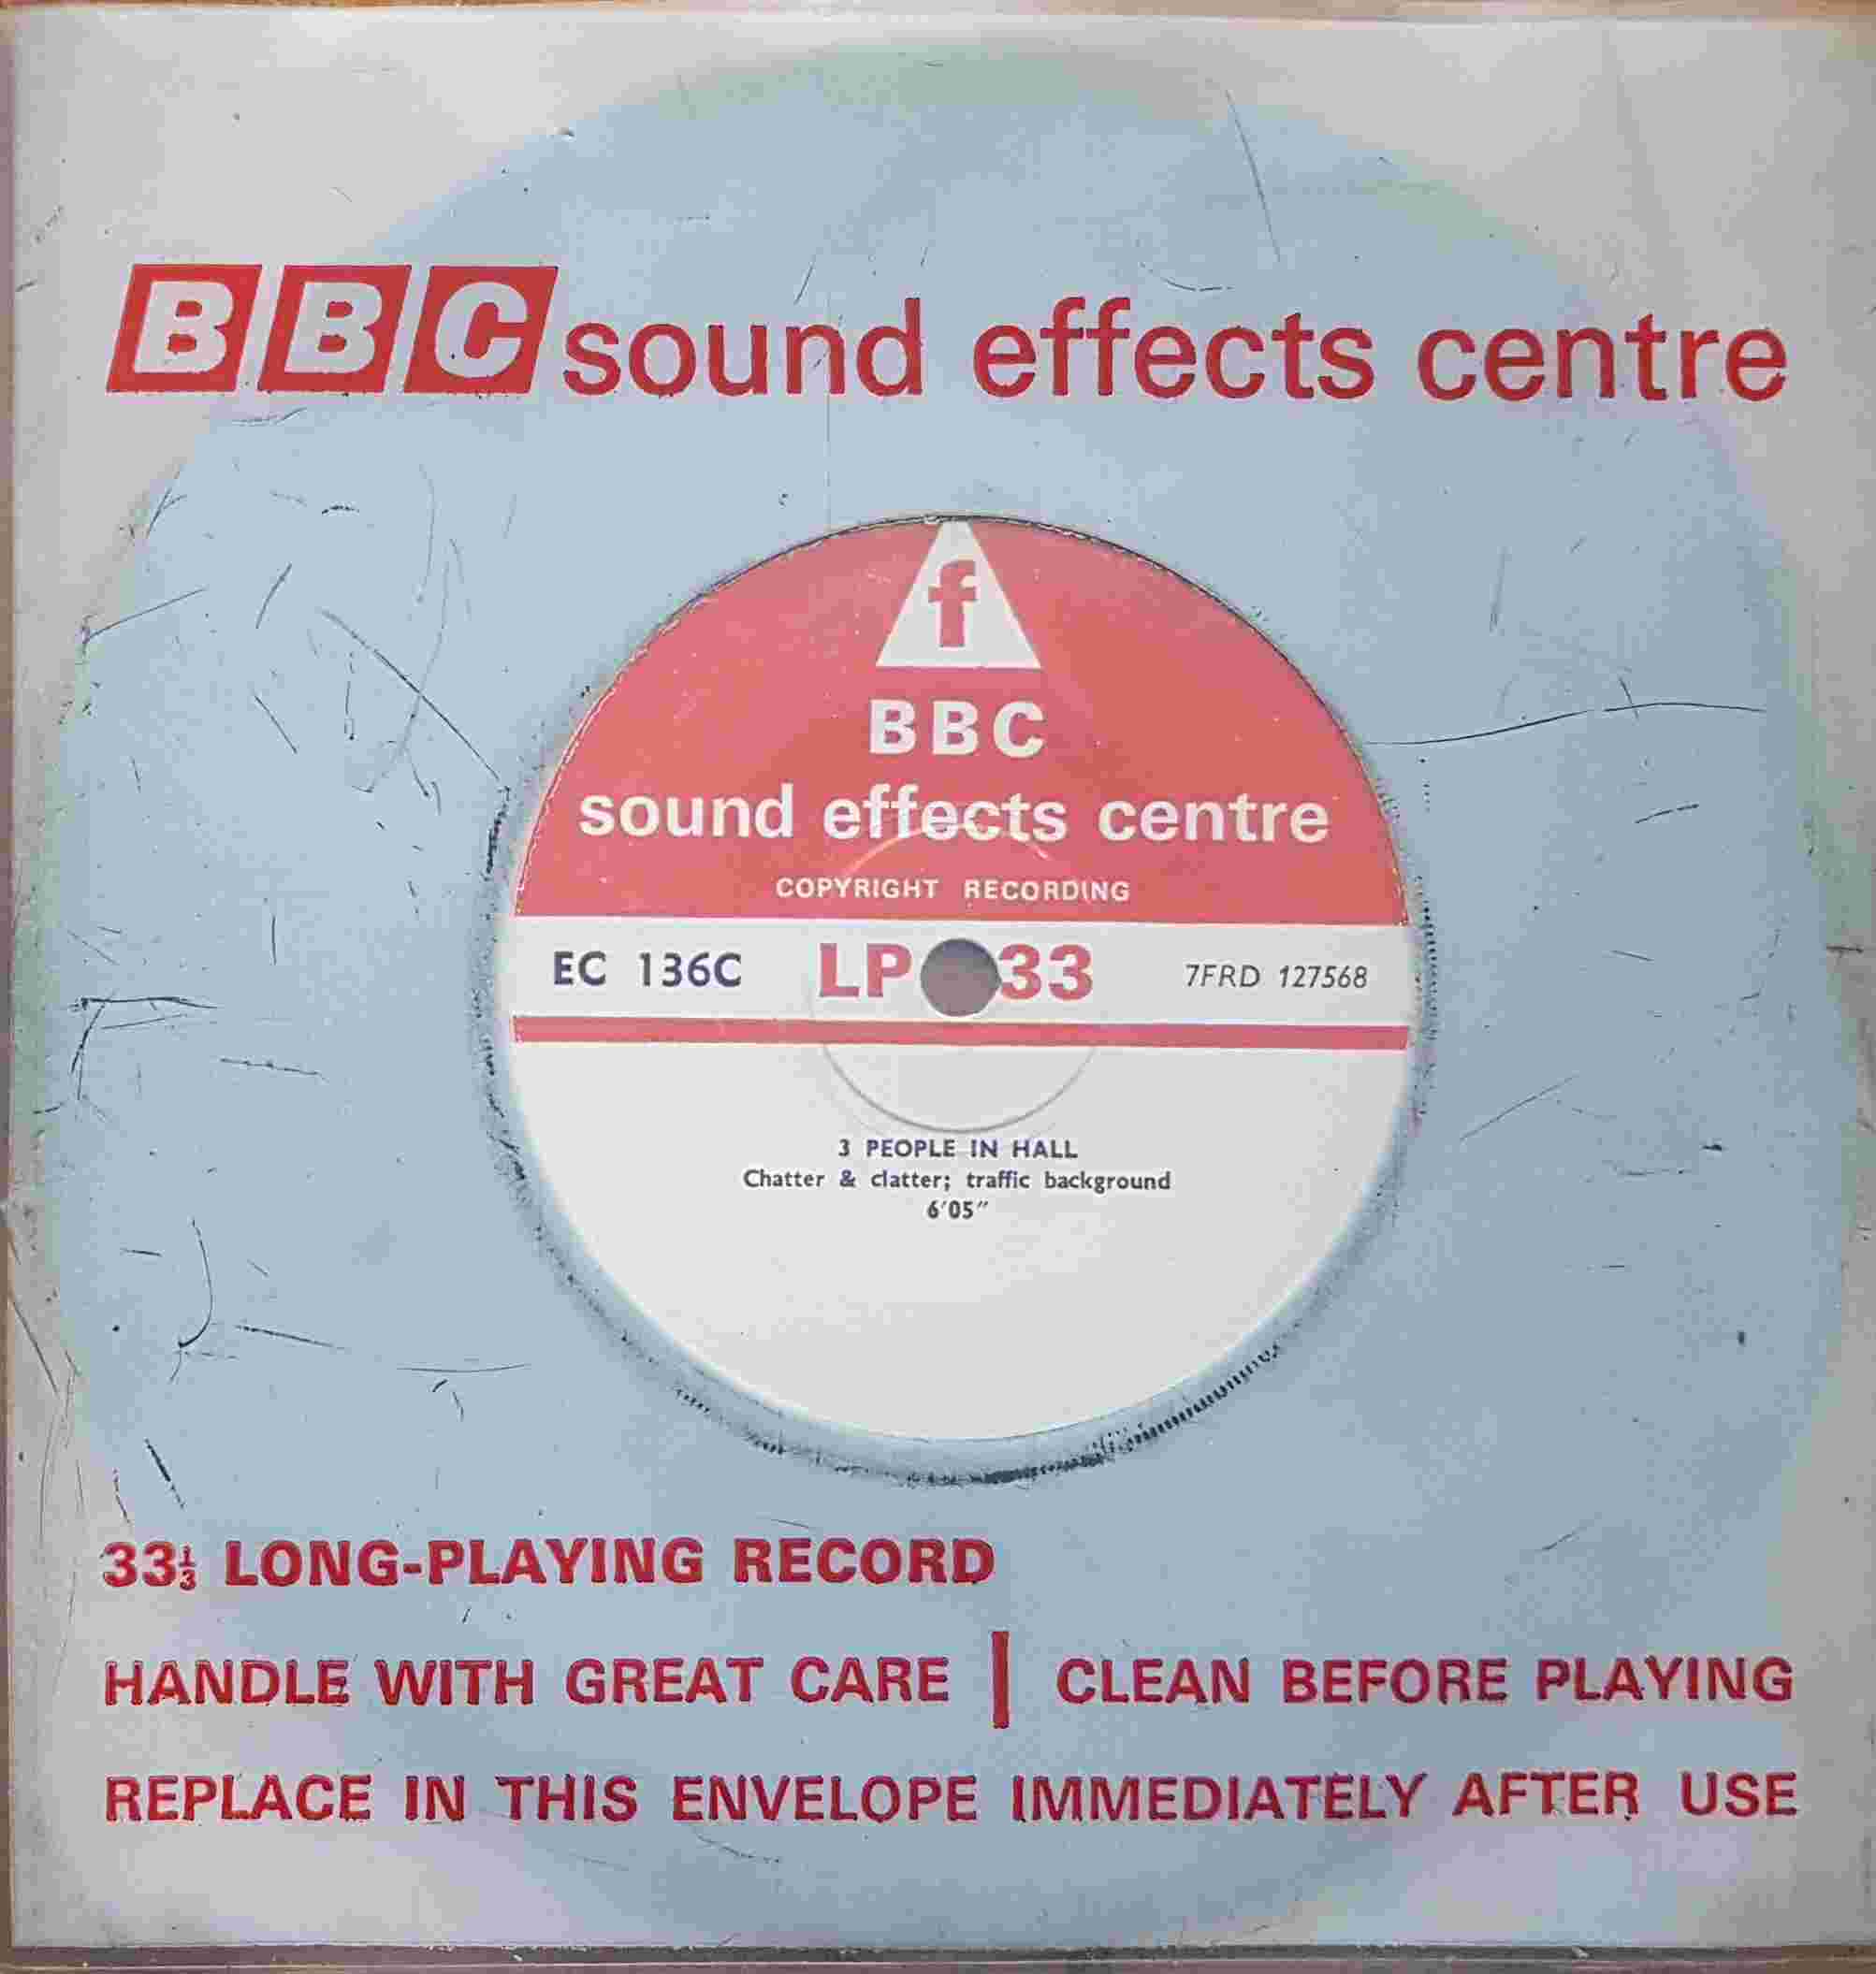 Picture of EC 136C 3 people in hall / 700 people in large hall by artist Not registered from the BBC singles - Records and Tapes library